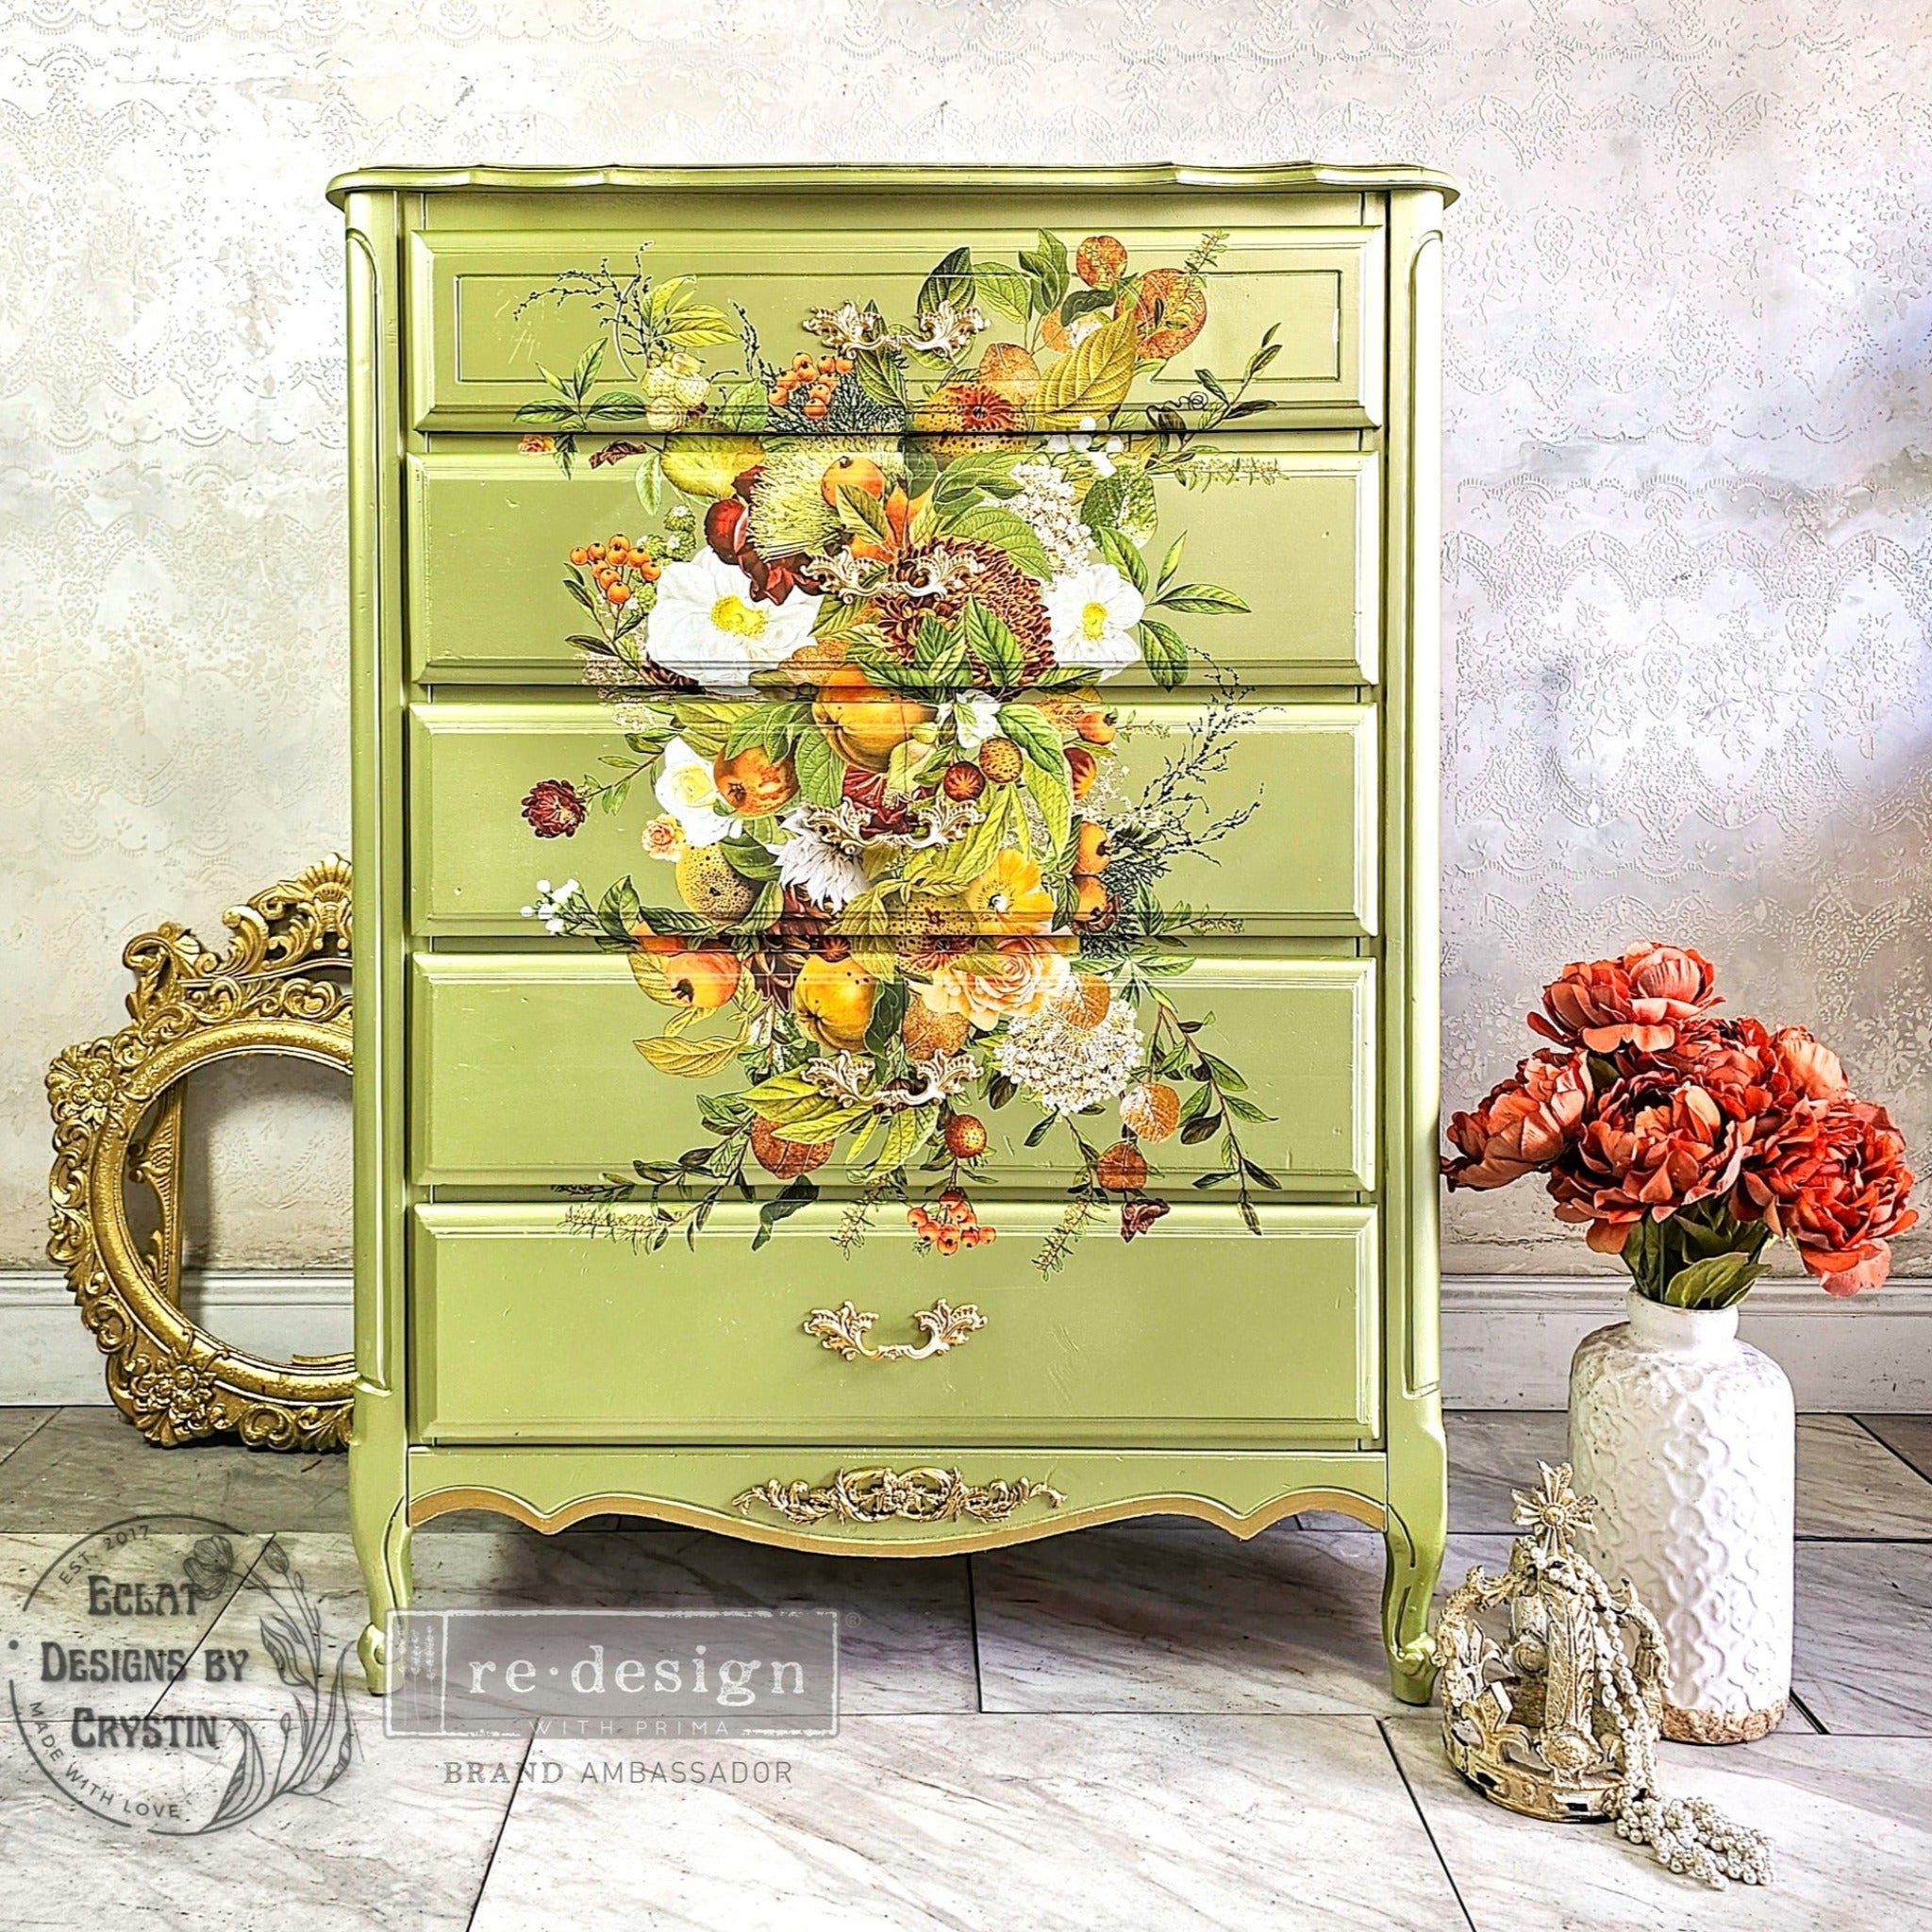 A 5-drwer chest dresser refurbished by Eclat Designs by Crystin is painted Spring green and features ReDesign with Prima's Harvest Hues transfer down the center of its top 4 drawers.